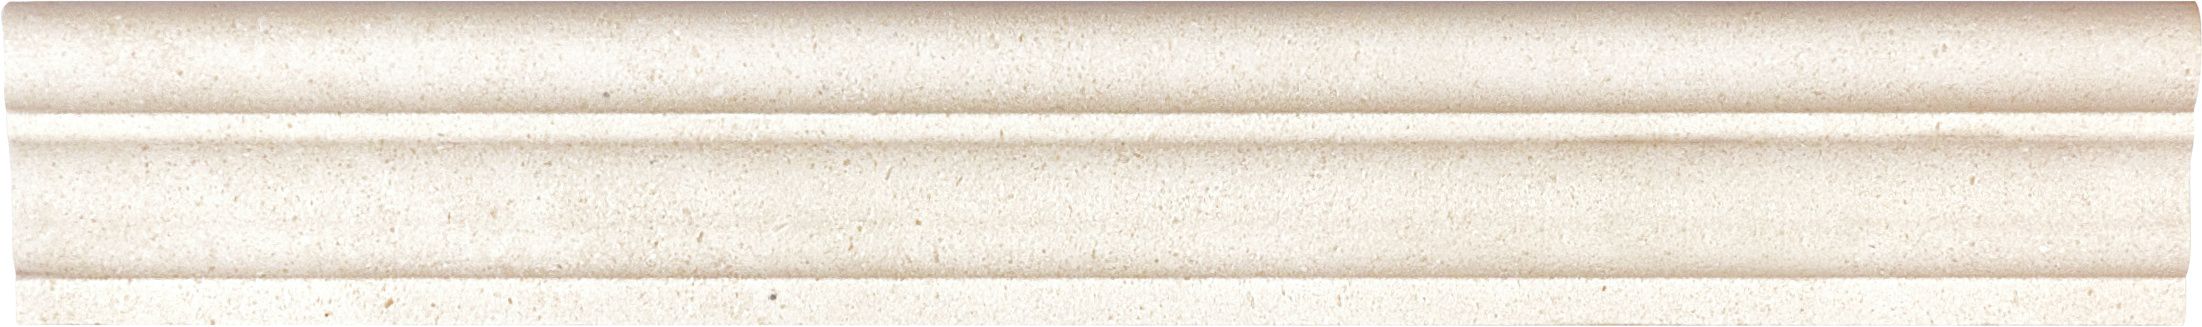 limestone pattern natural stone chairrail molding from serene ivory anatolia collection distributed by surface group international honed finish straight edge edge 2x12 bar shape